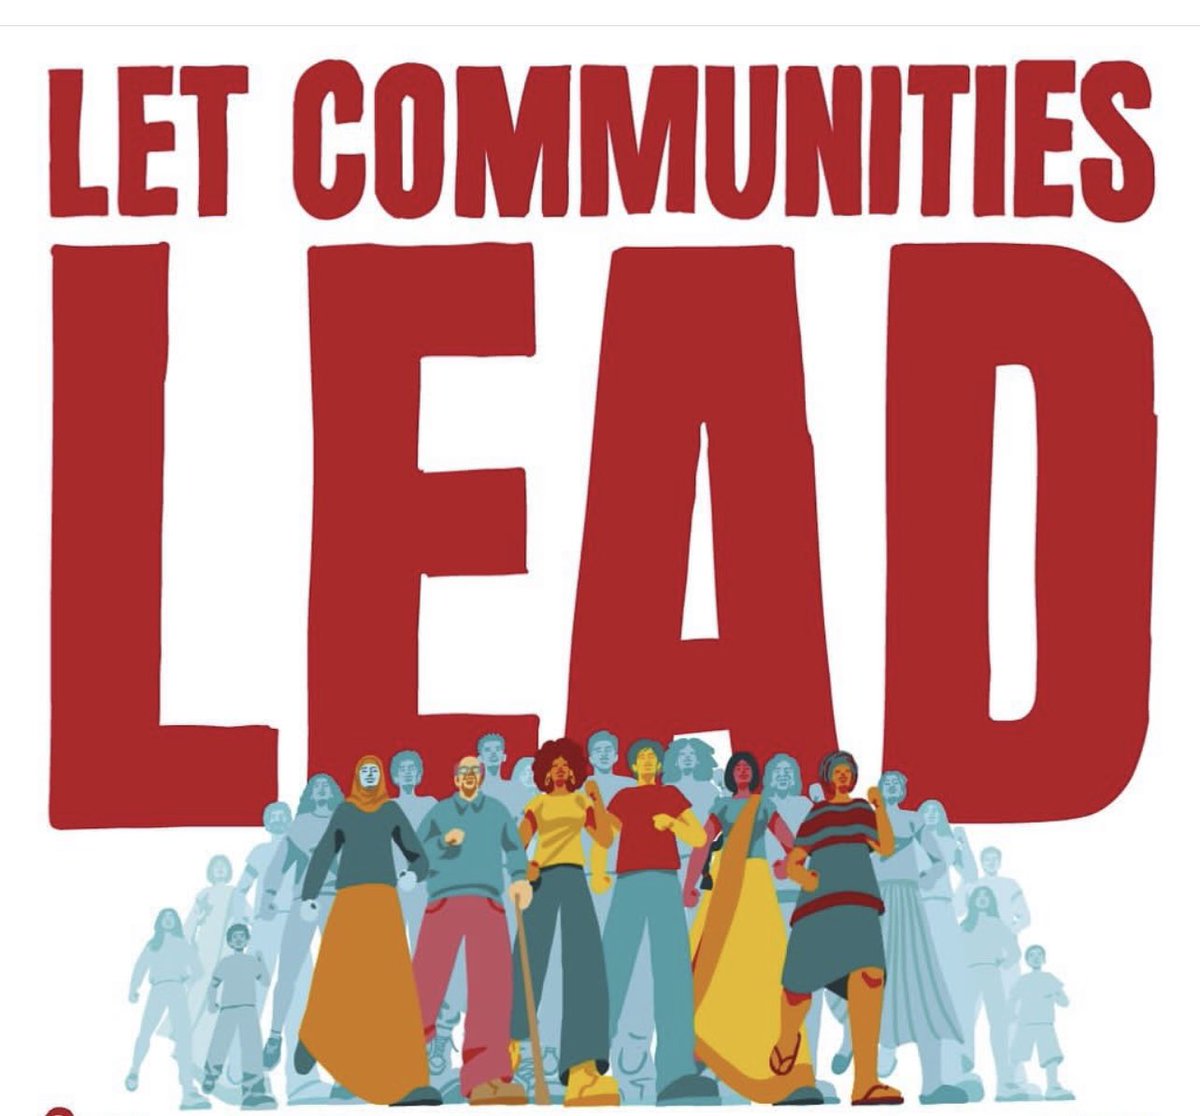 As we commemorate World AIDS Day, we remind ourselves of our efforts towards eradicating HIV and AIDS. Global Solidarity, Shared Responsibility. #LetCommunitiesLead @IPPFAR @ippf